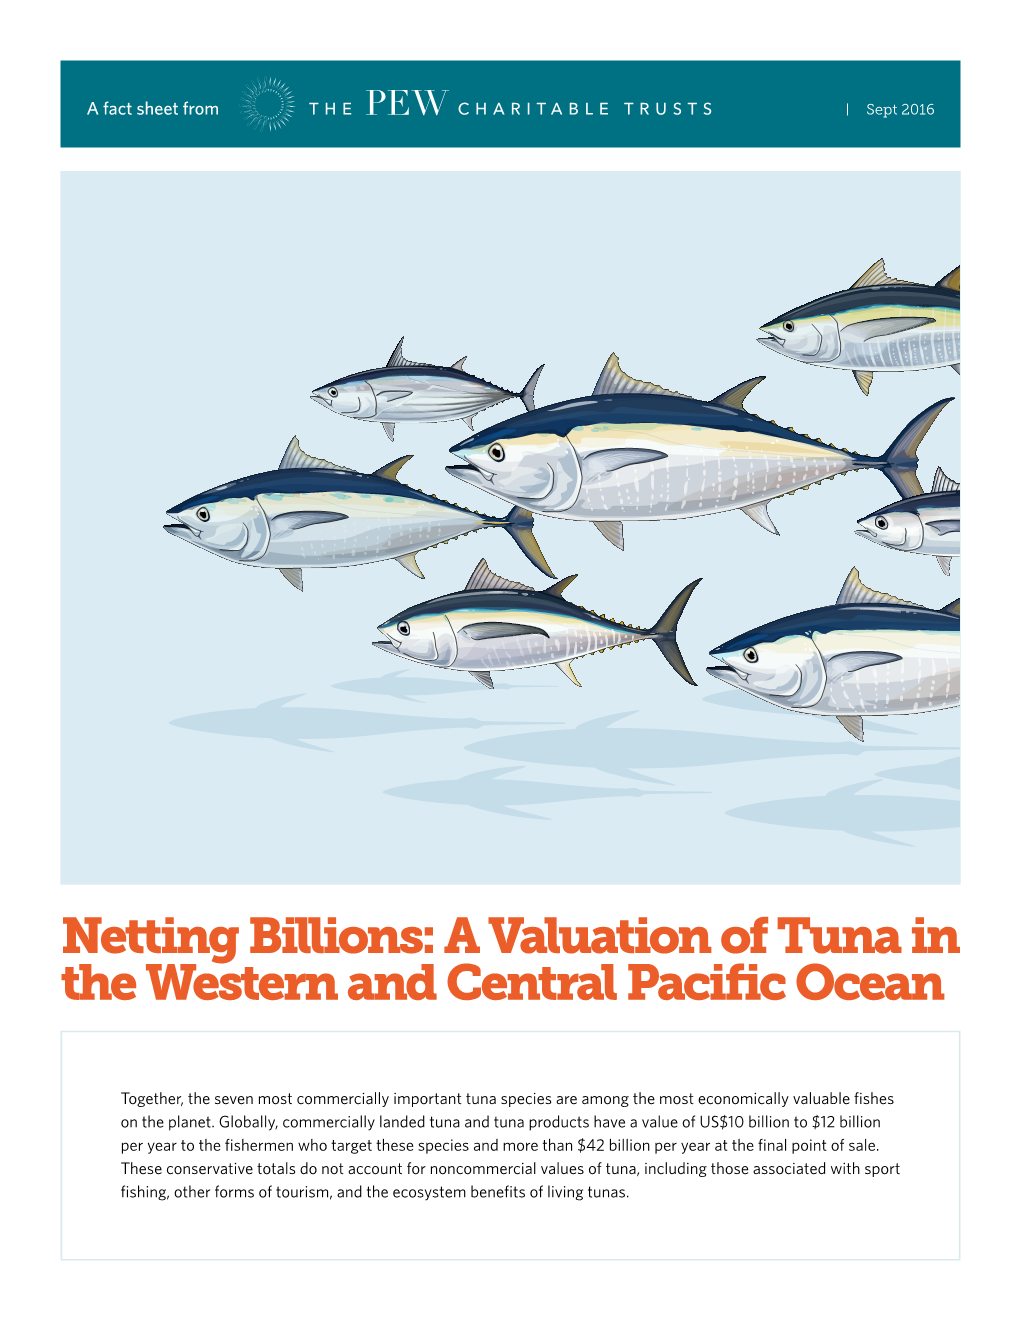 A Valuation of Tuna in the Western and Central Pacific Ocean